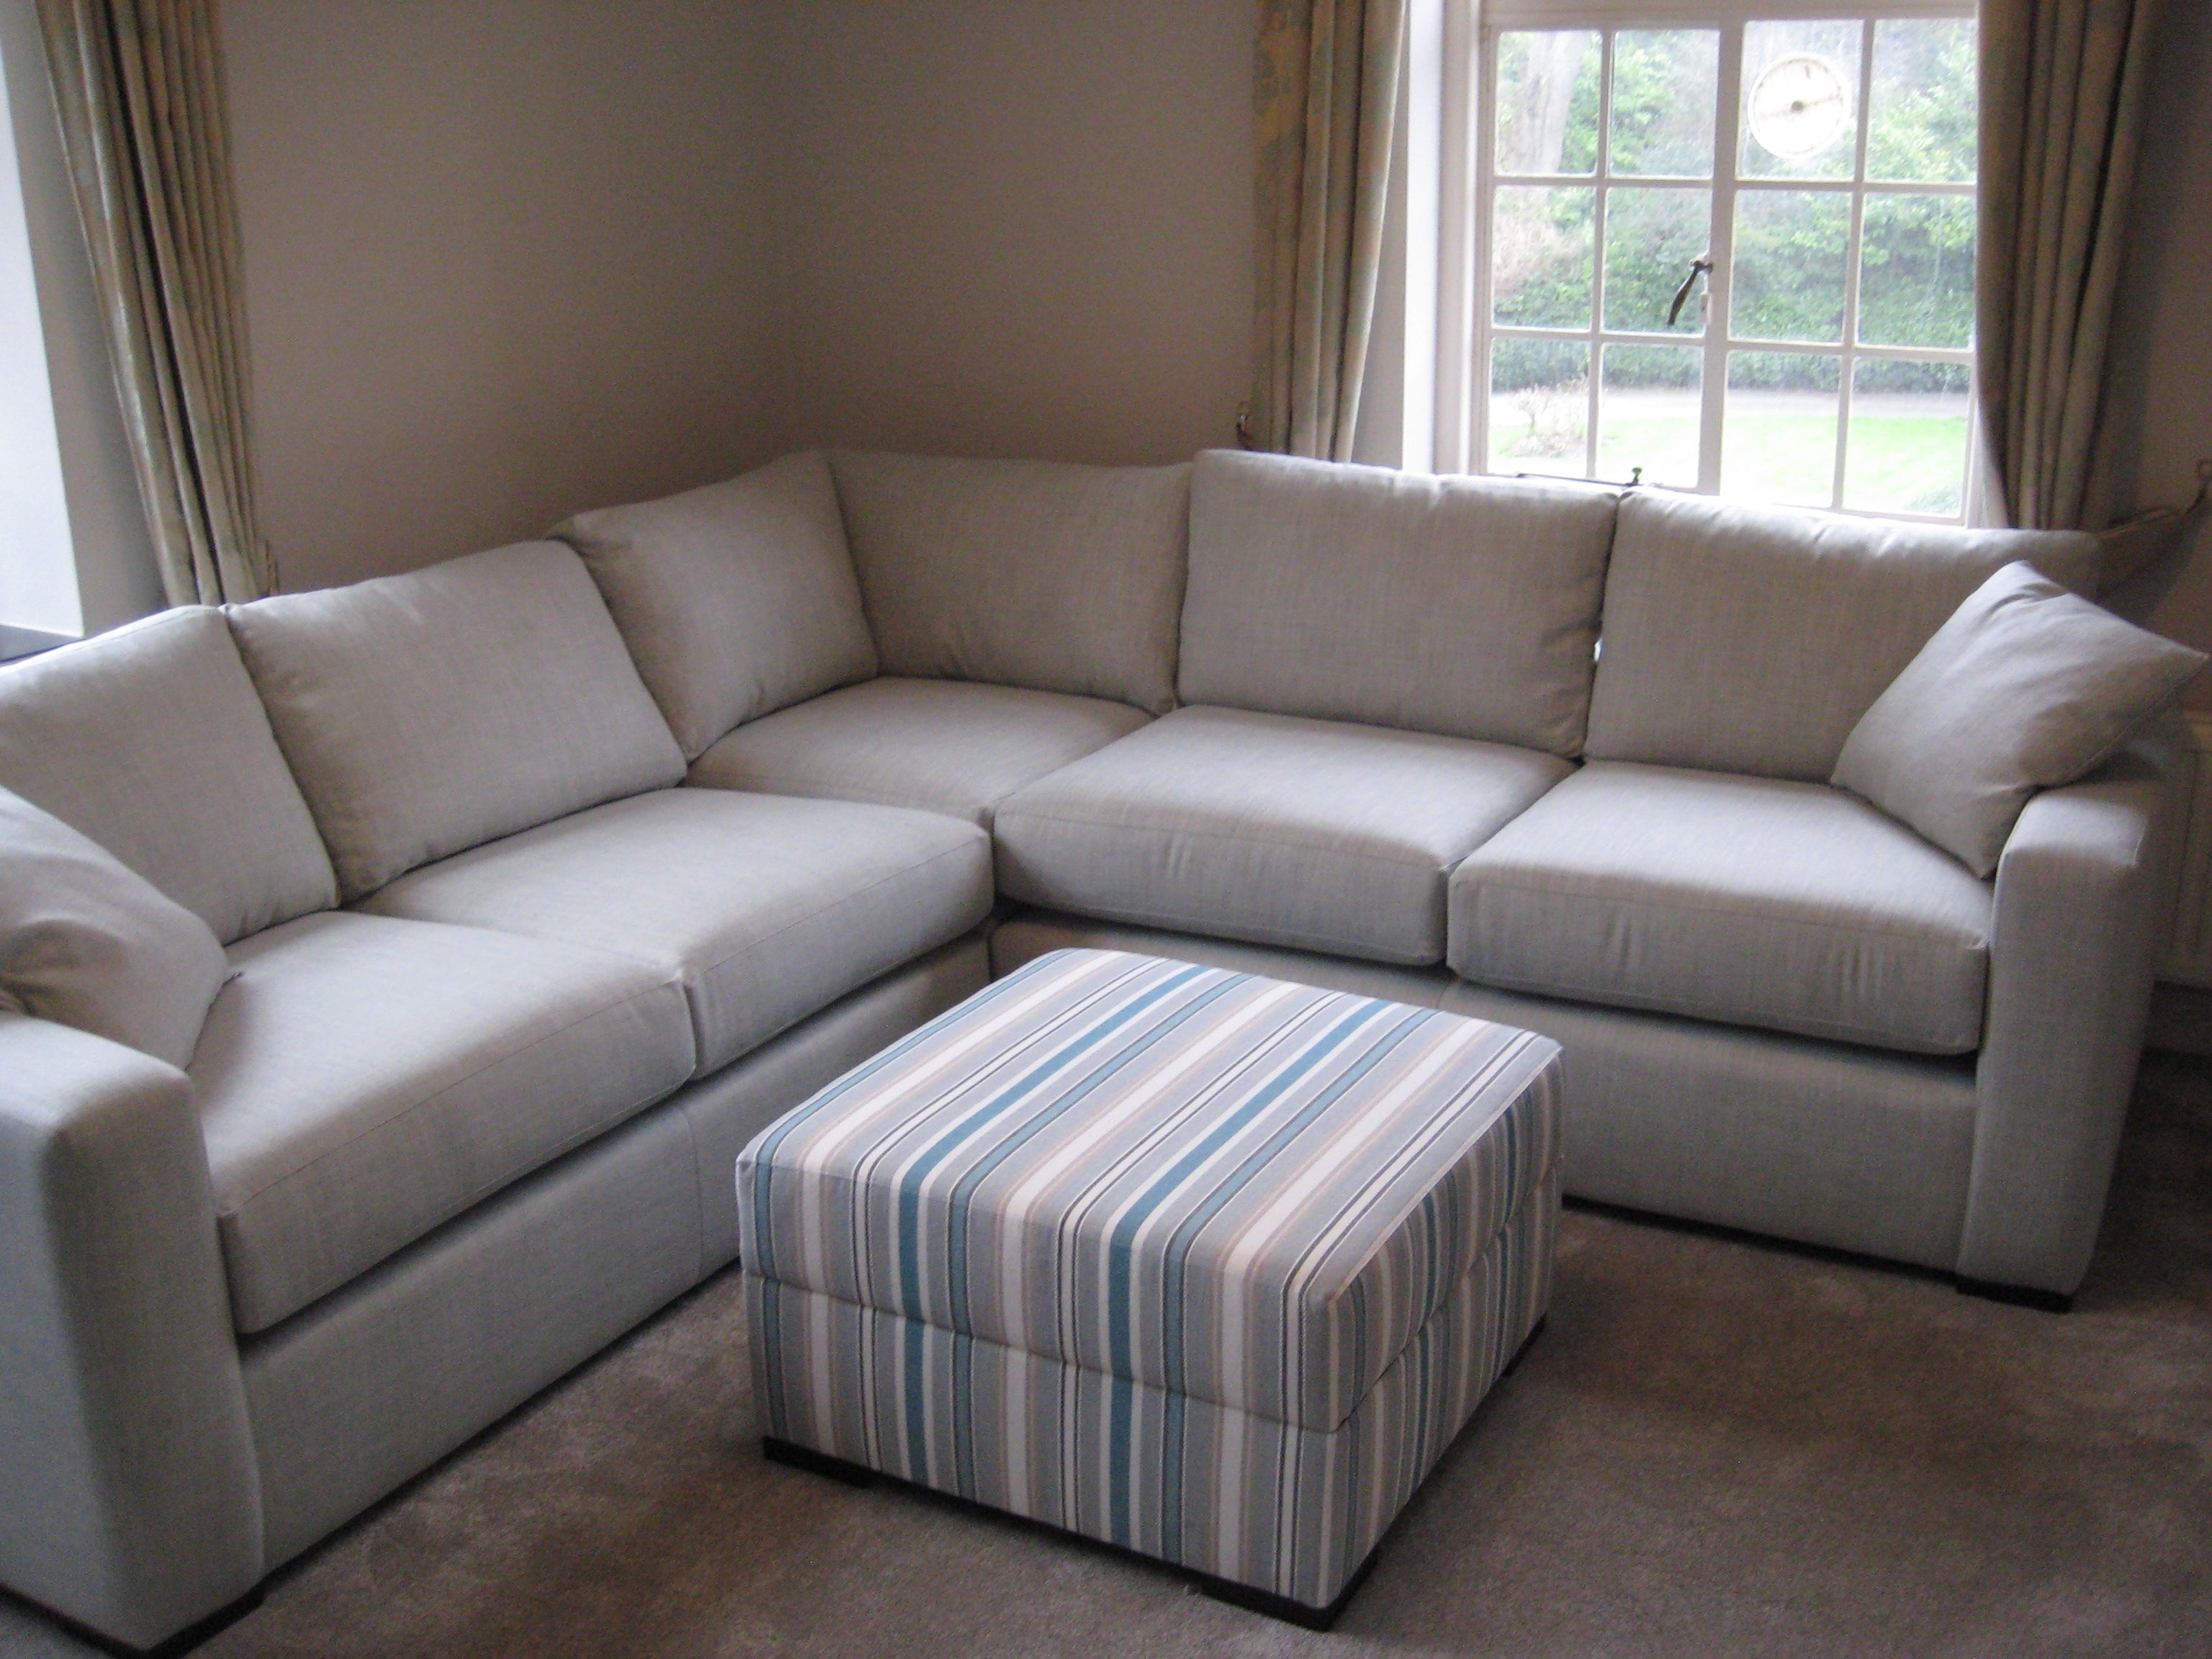 Fully Bespoke Corner Sofa Unit With A Fun Contrasting Footstool Inside Bespoke Corner Sofa Beds (View 2 of 15)